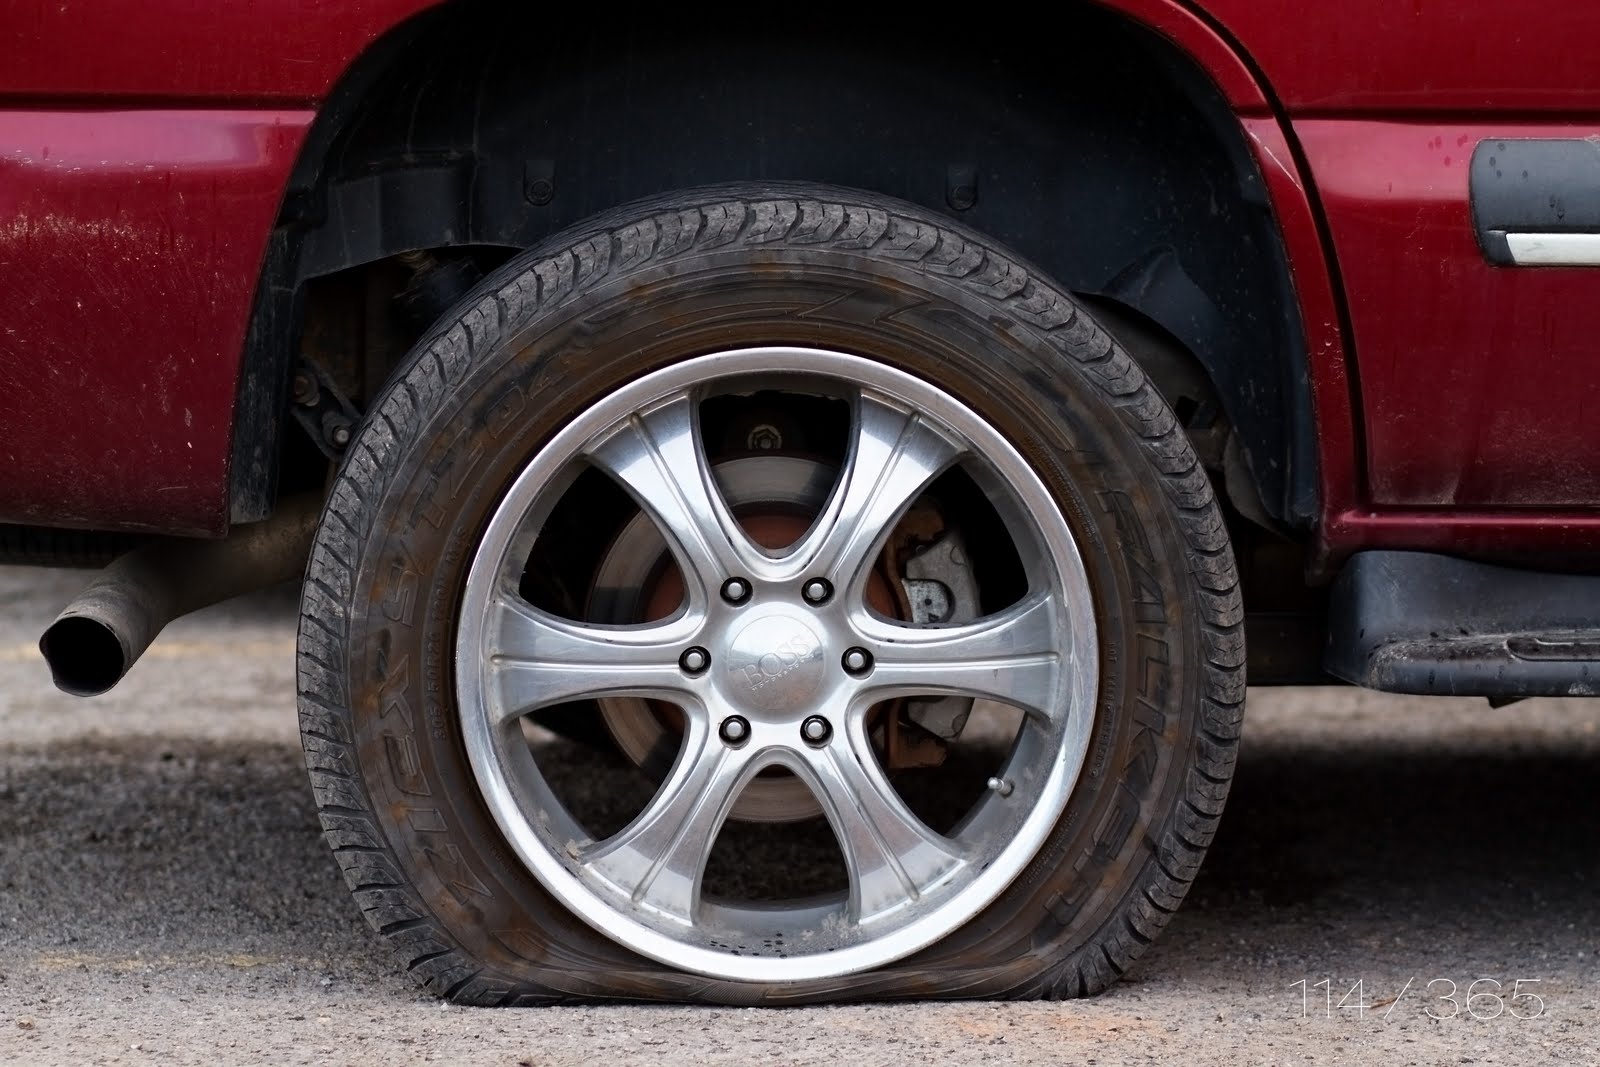 Purim: The Religious Significance of a Flat Tire